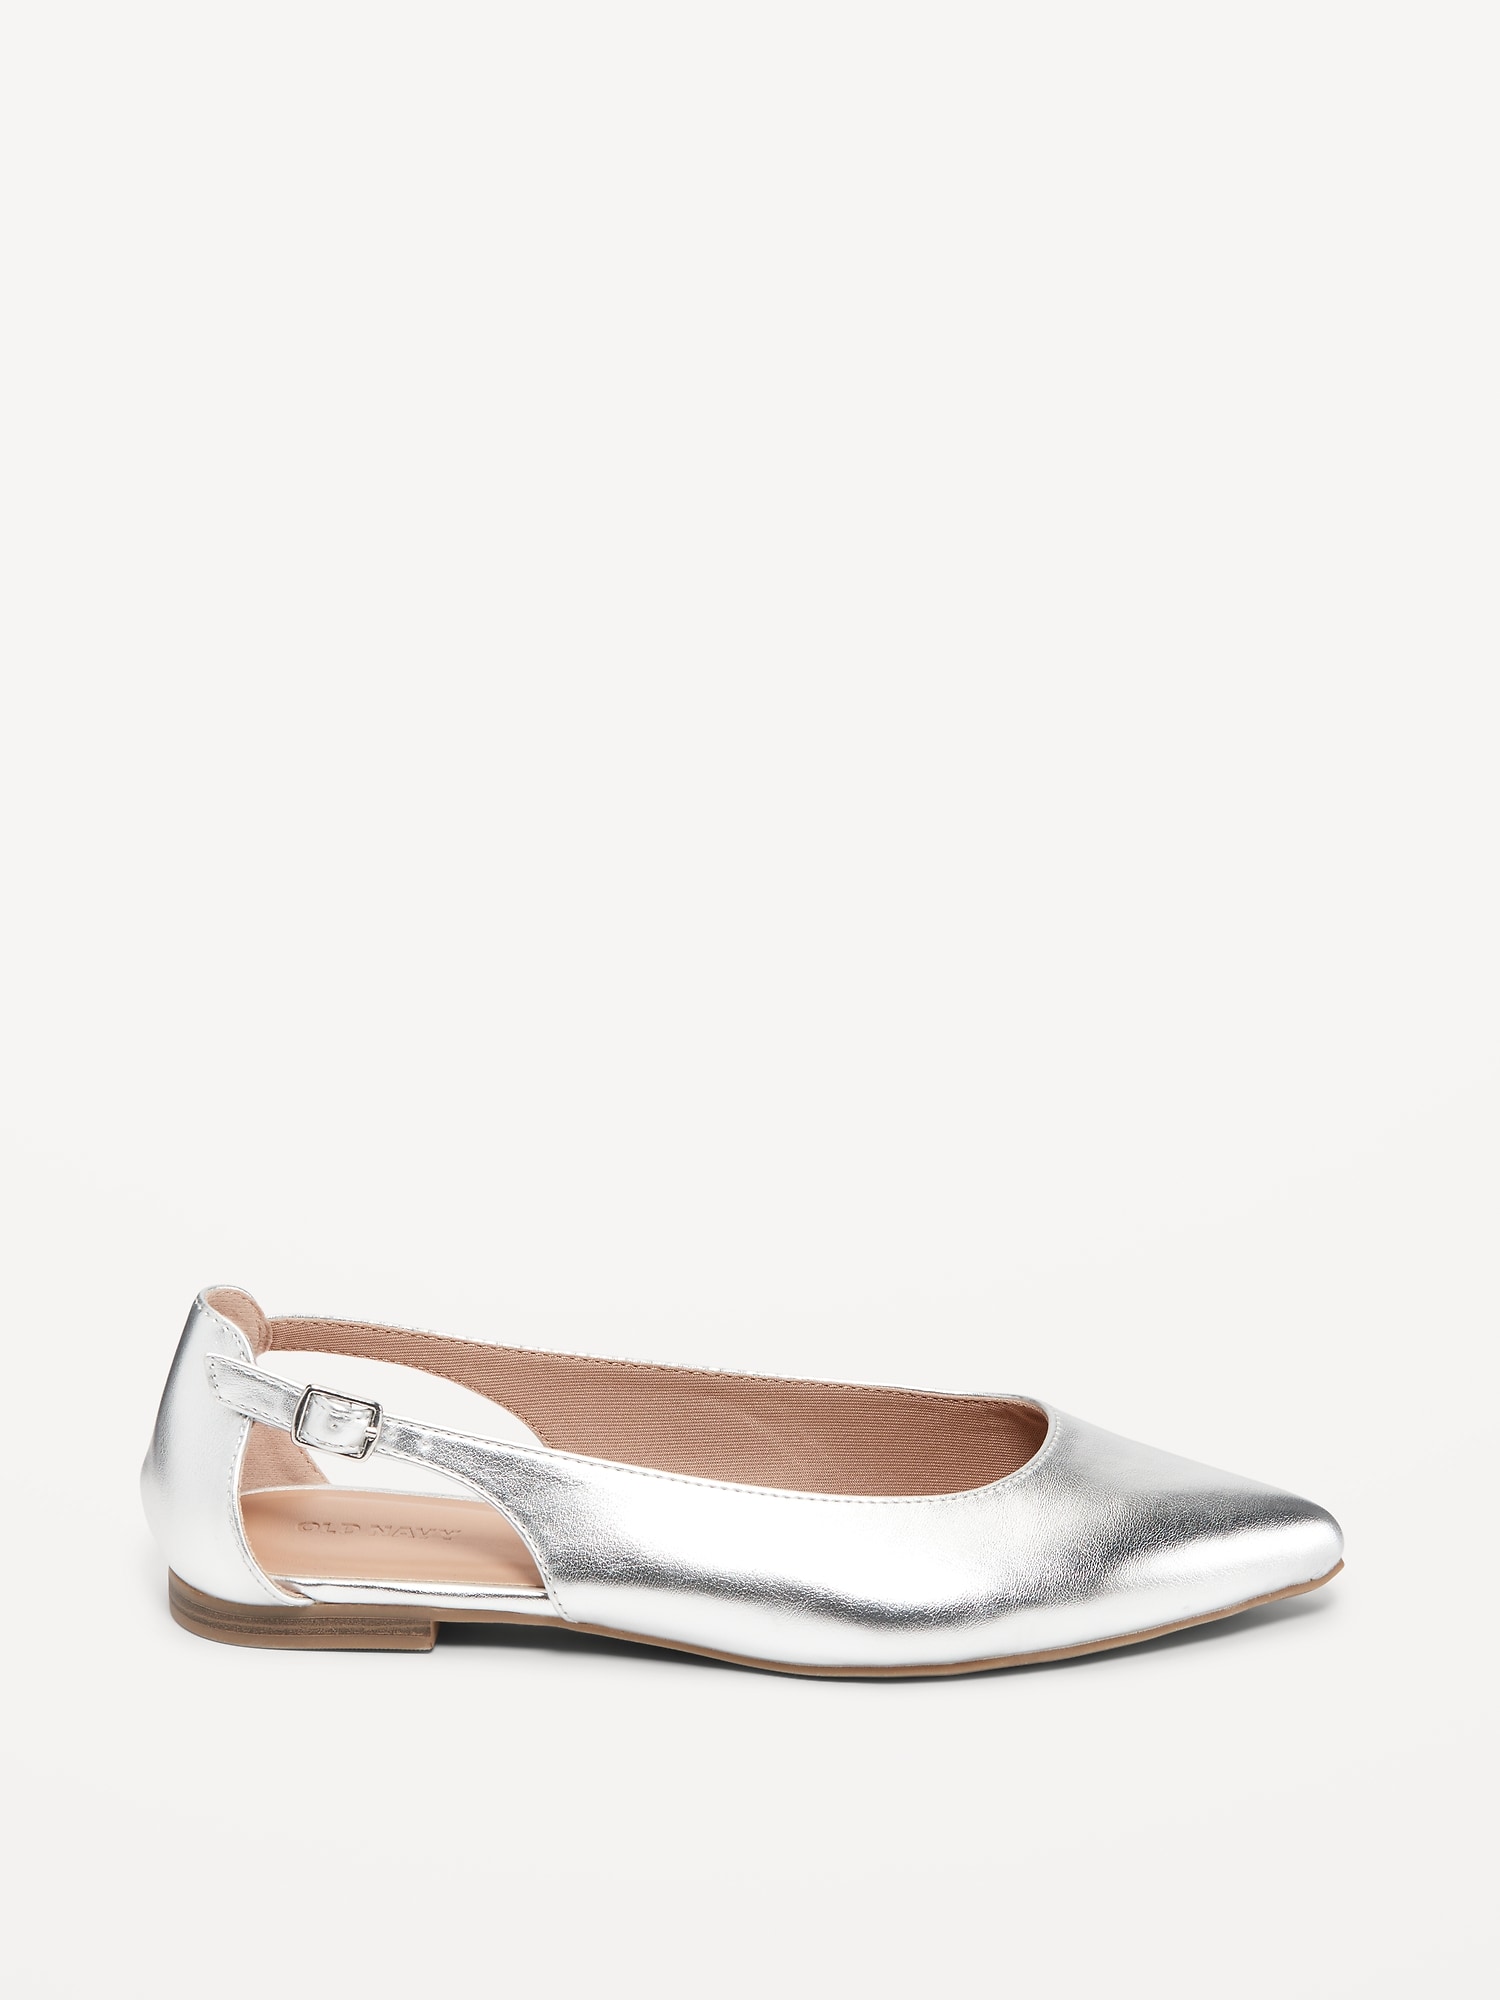 Faux-Leather Slingback Ballet Flat | Old Navy